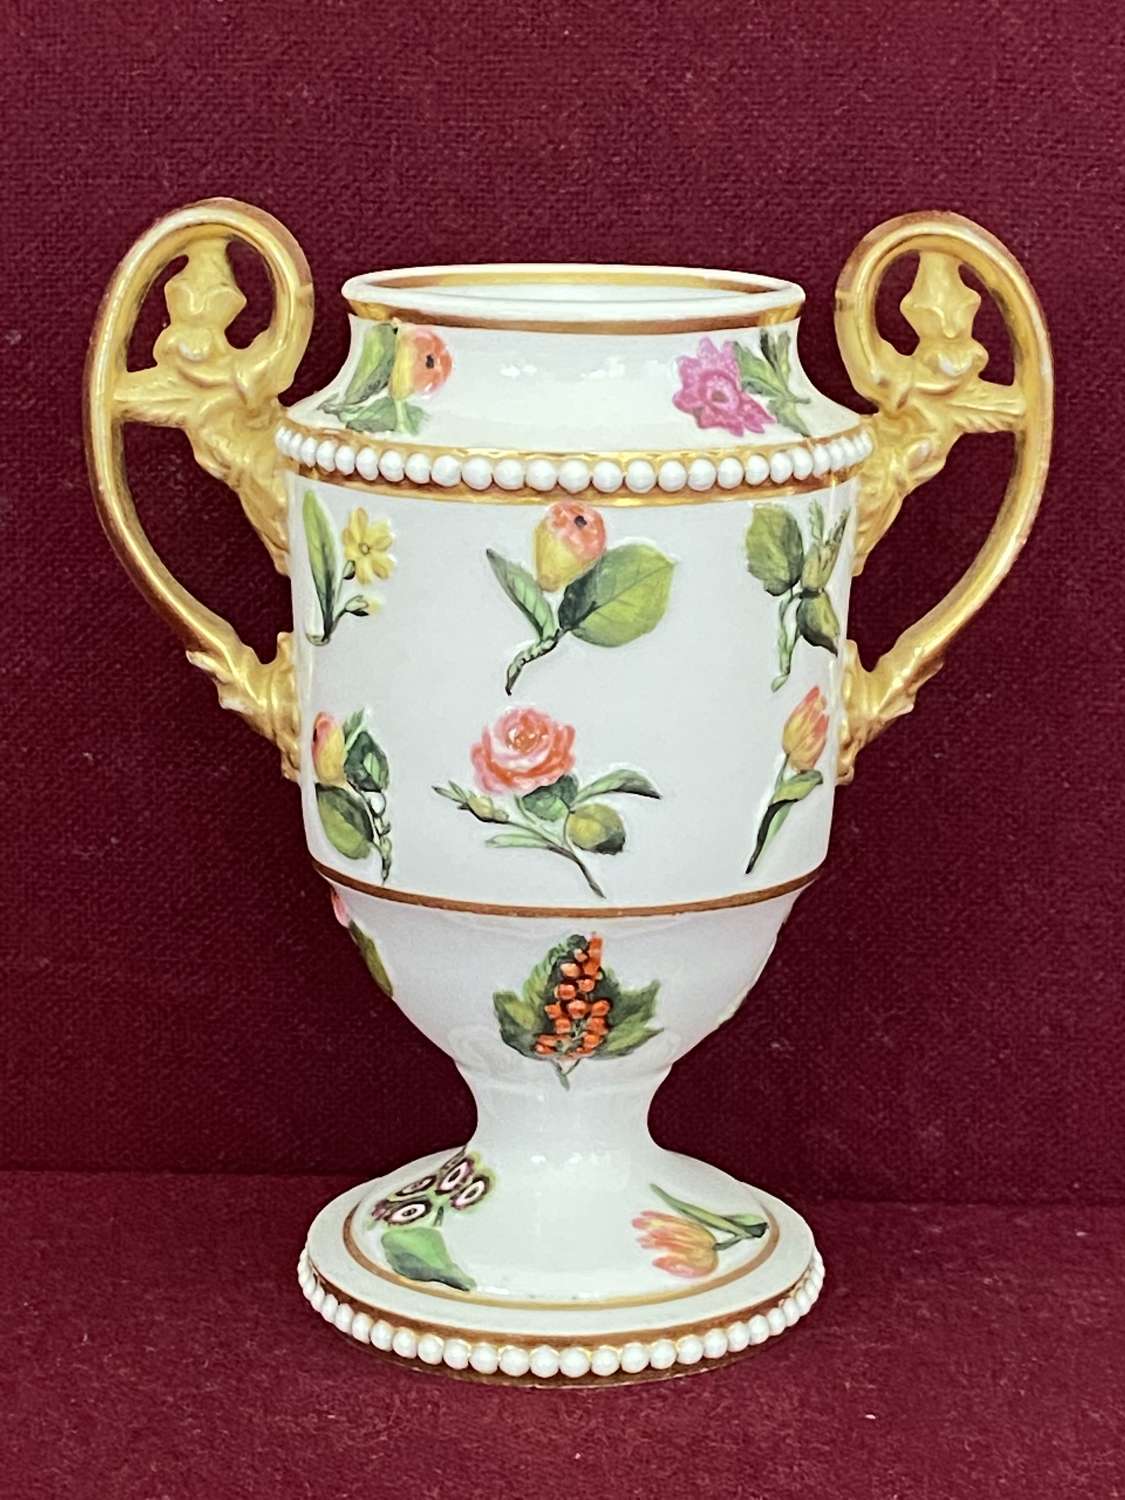 A small Spode porcelain vase c.1820 finely decorated in pattern 2910